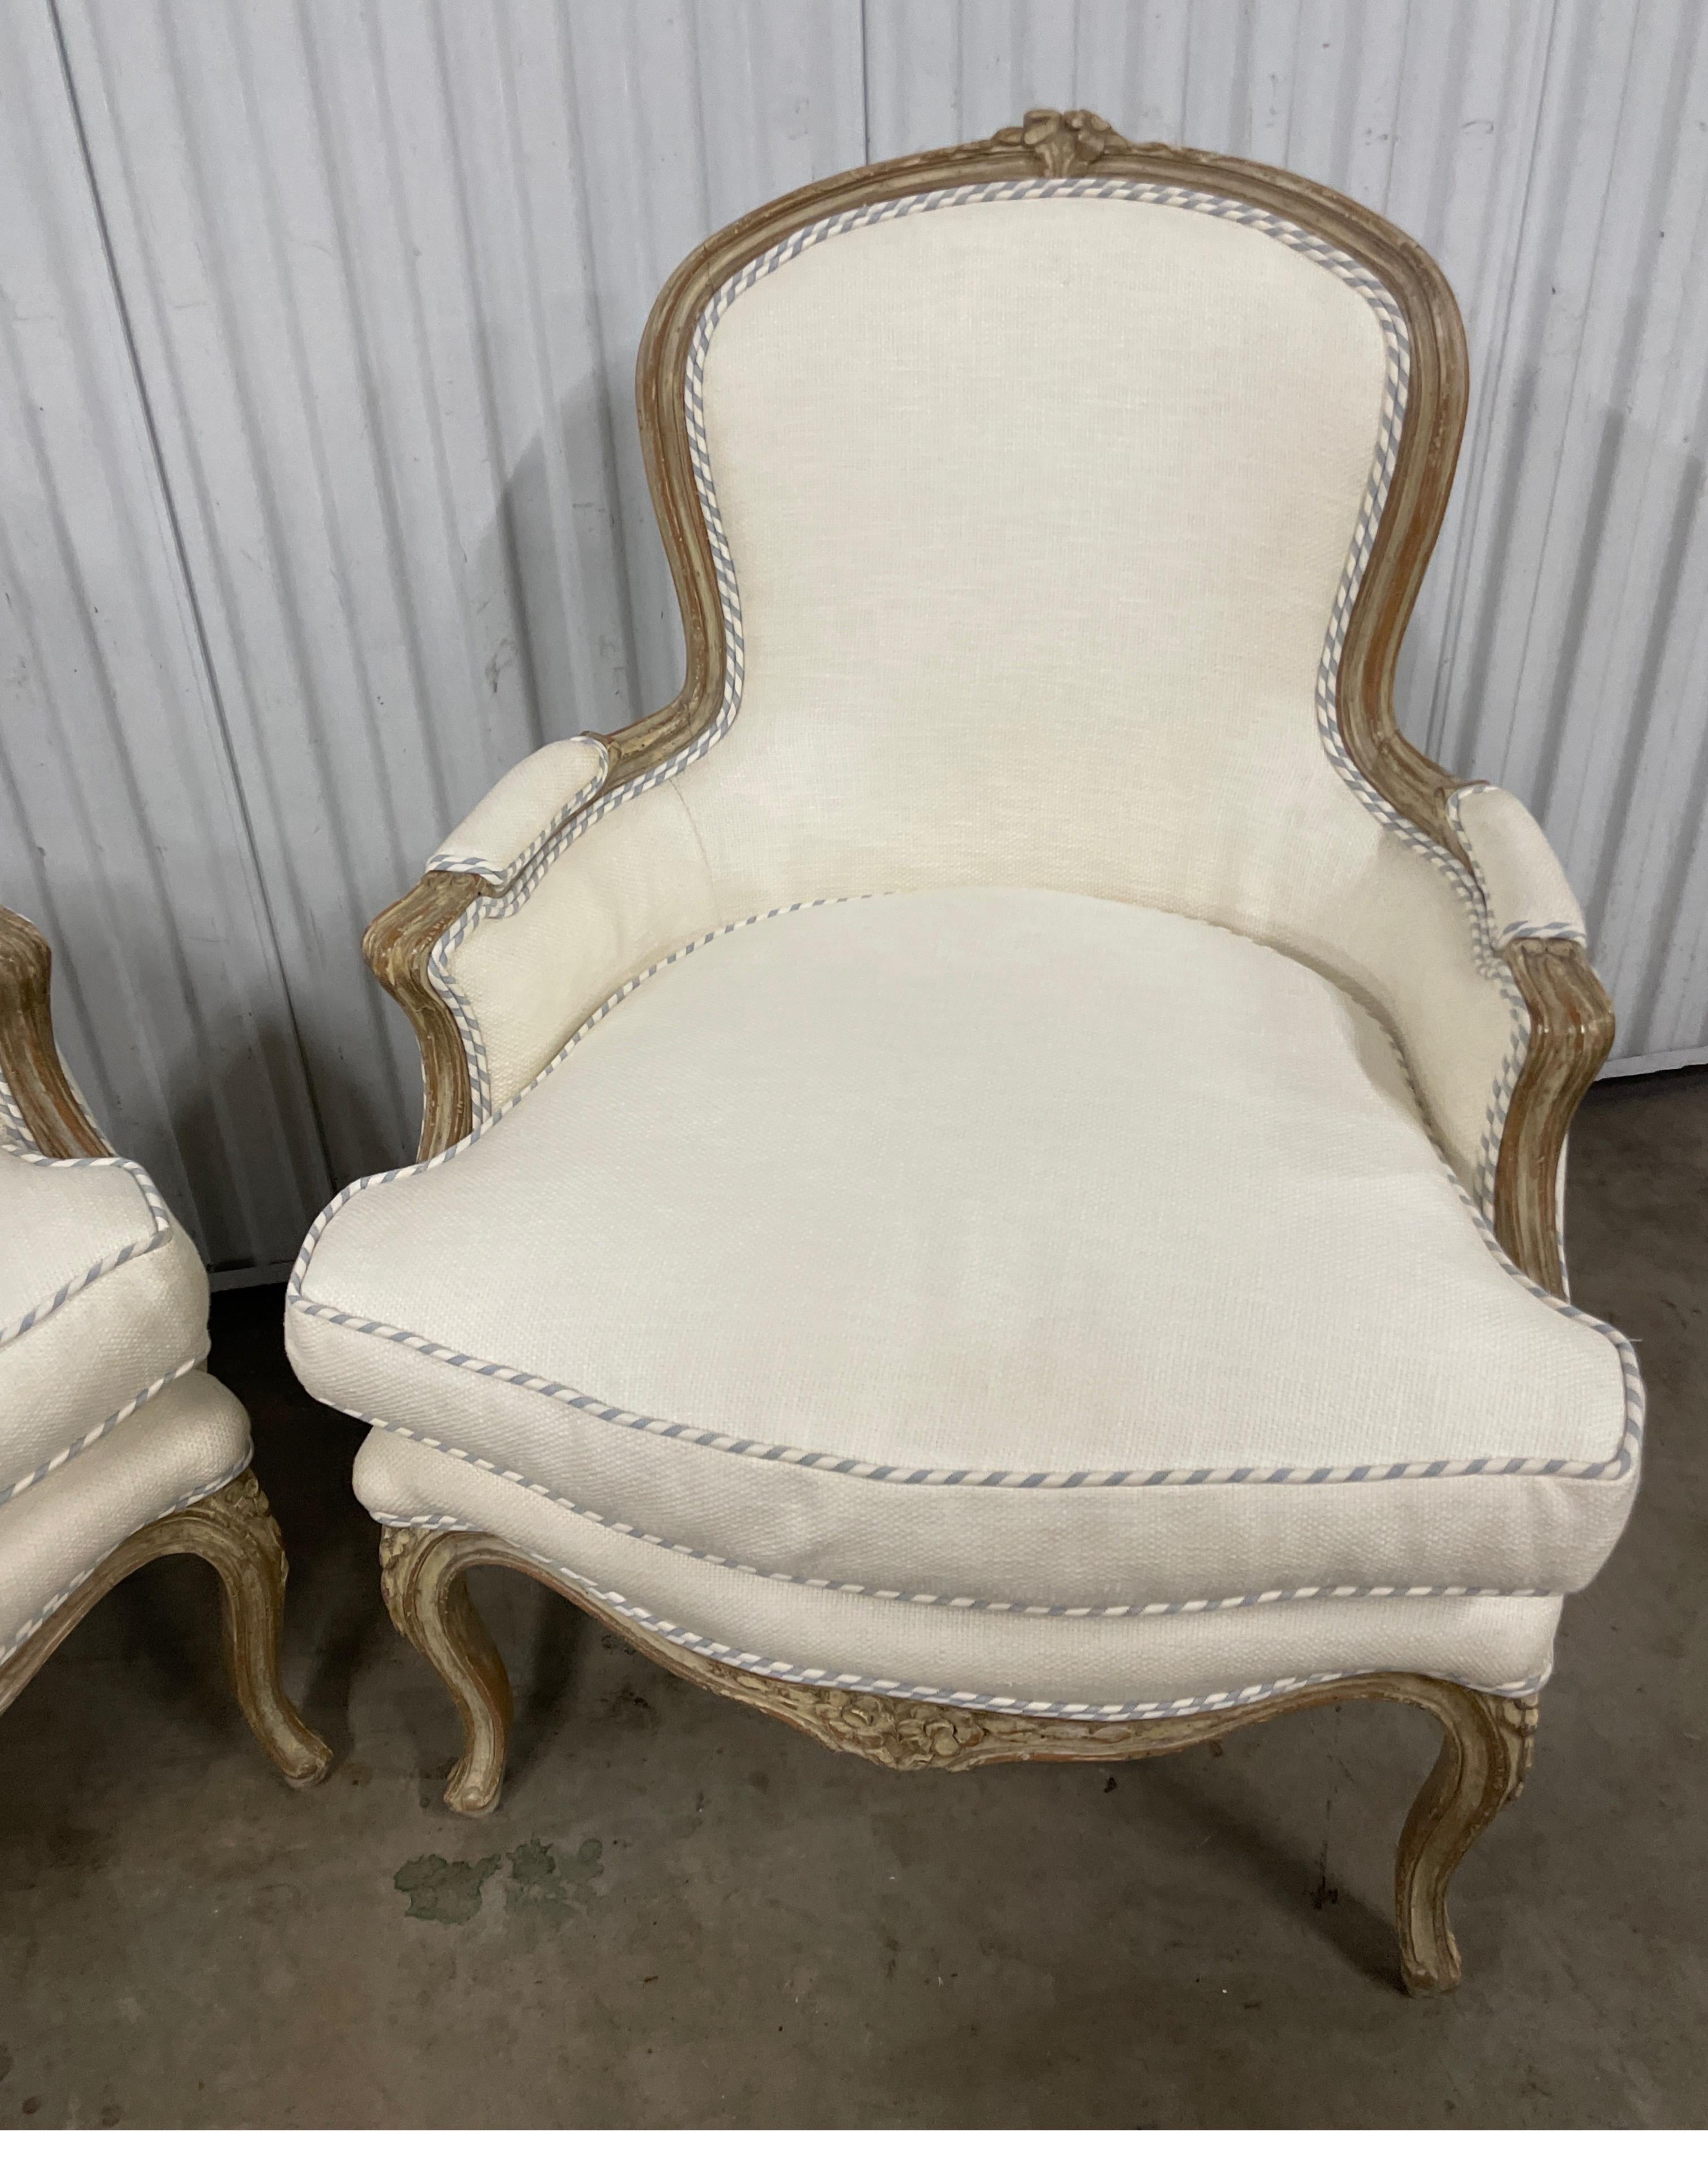 Very chic pair of 19th century French Bergere chairs upholstered in an off white cotton / linen fabric with blue & white ticking welt & backs. Frames have a light whitewash finish.